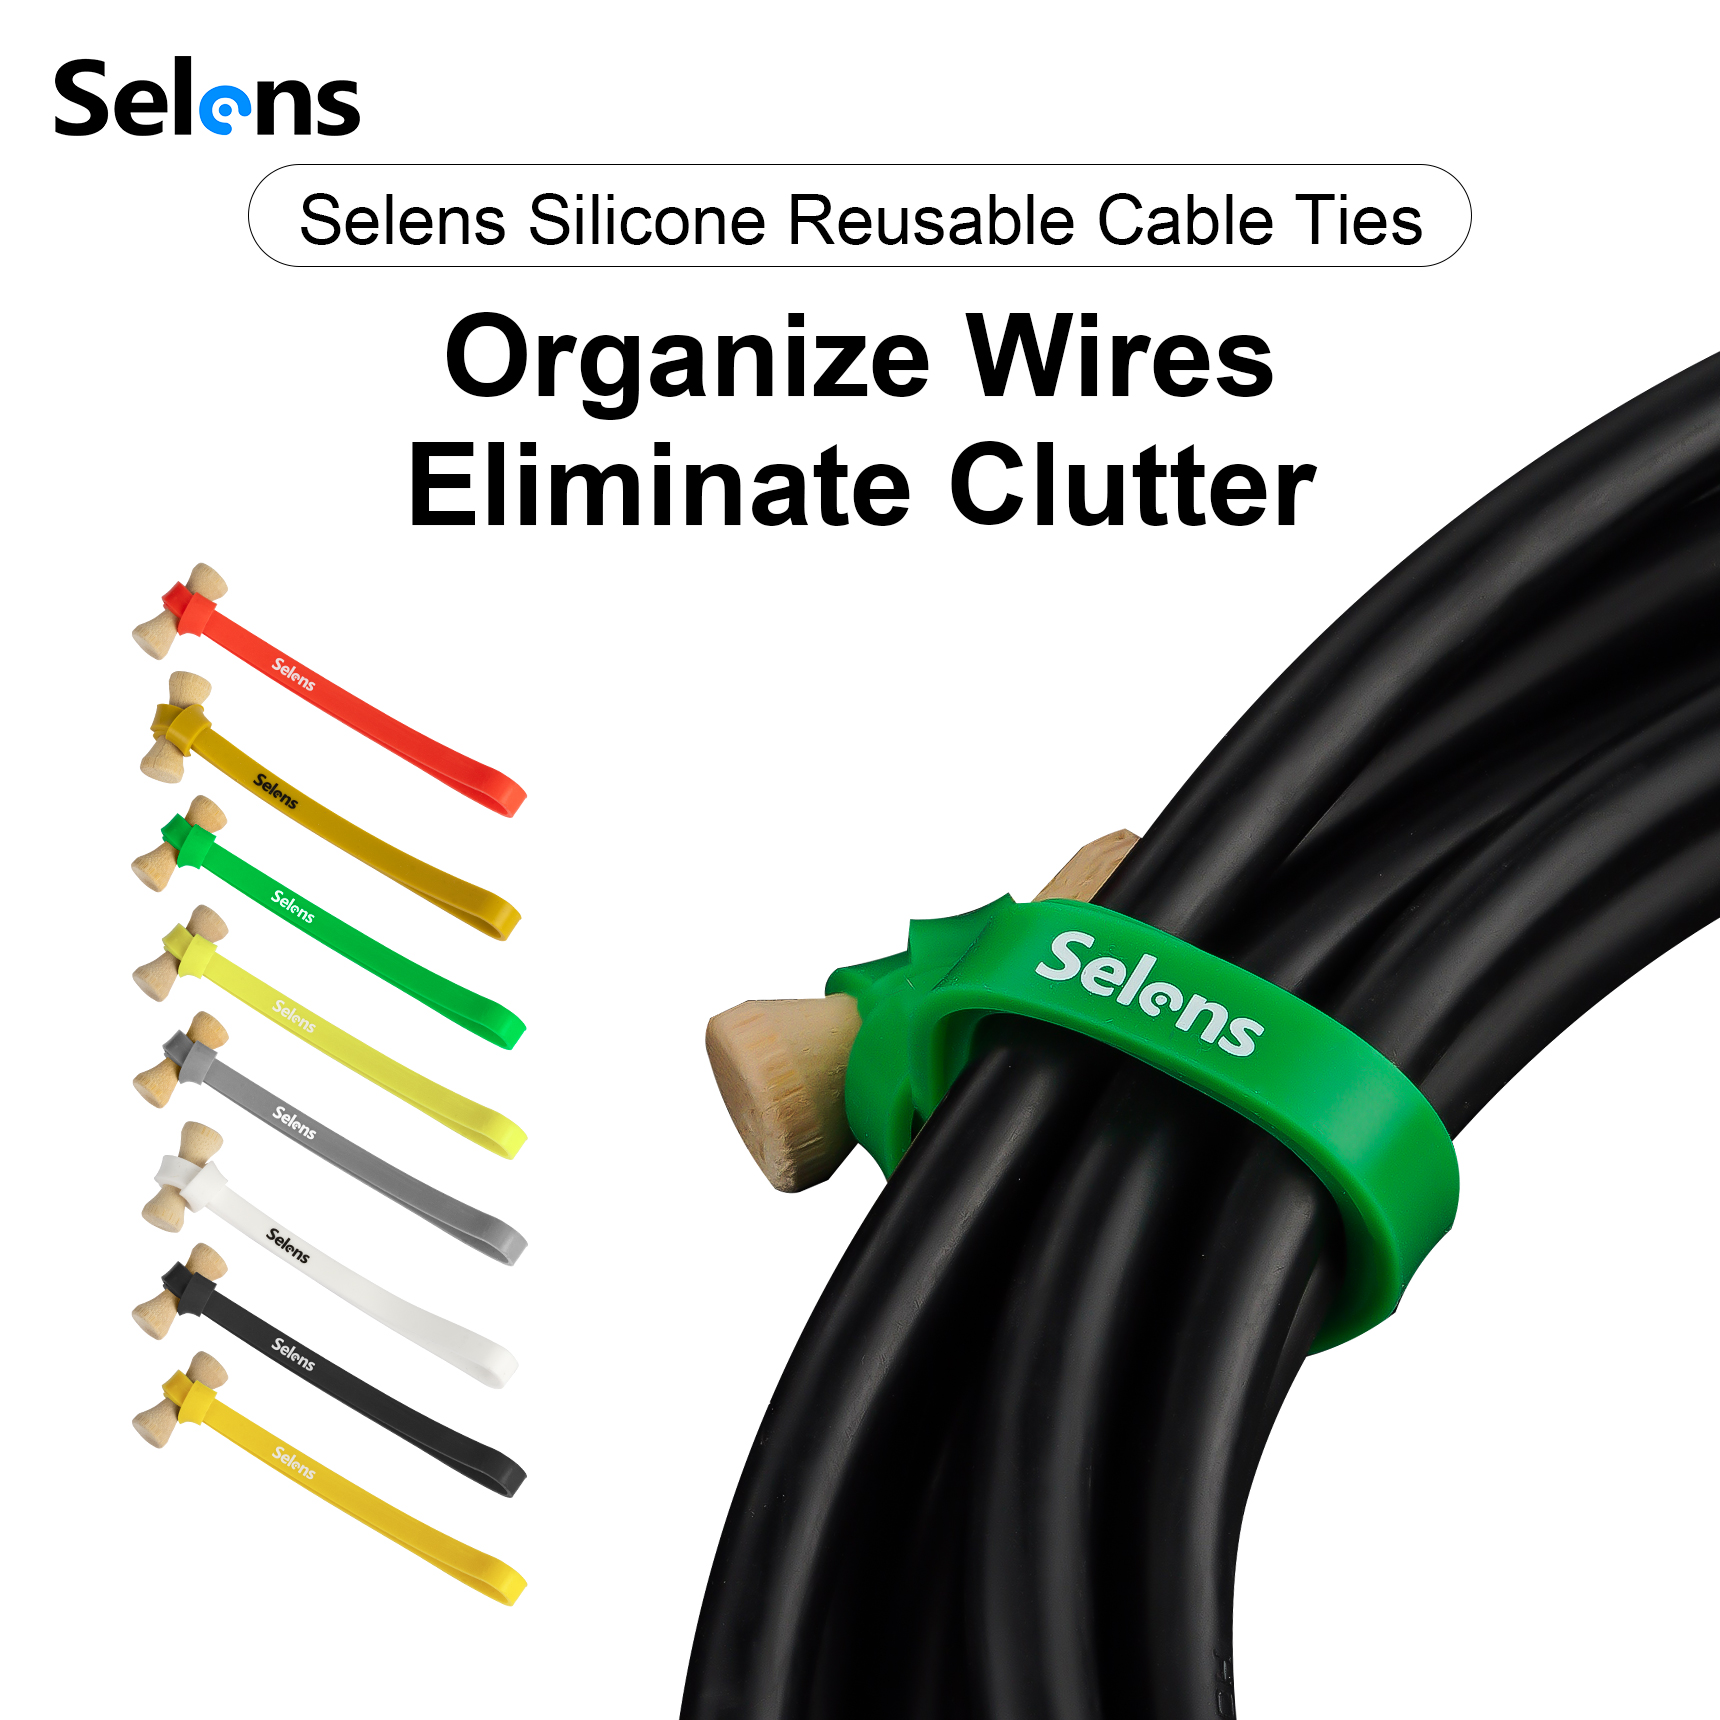 Selens 8 Colors Silicone Cable Ties Multi-colors, Reusable Cable Management，Multi-Purpose Cord Wire Organizer For Studio Wire Storage and Organization